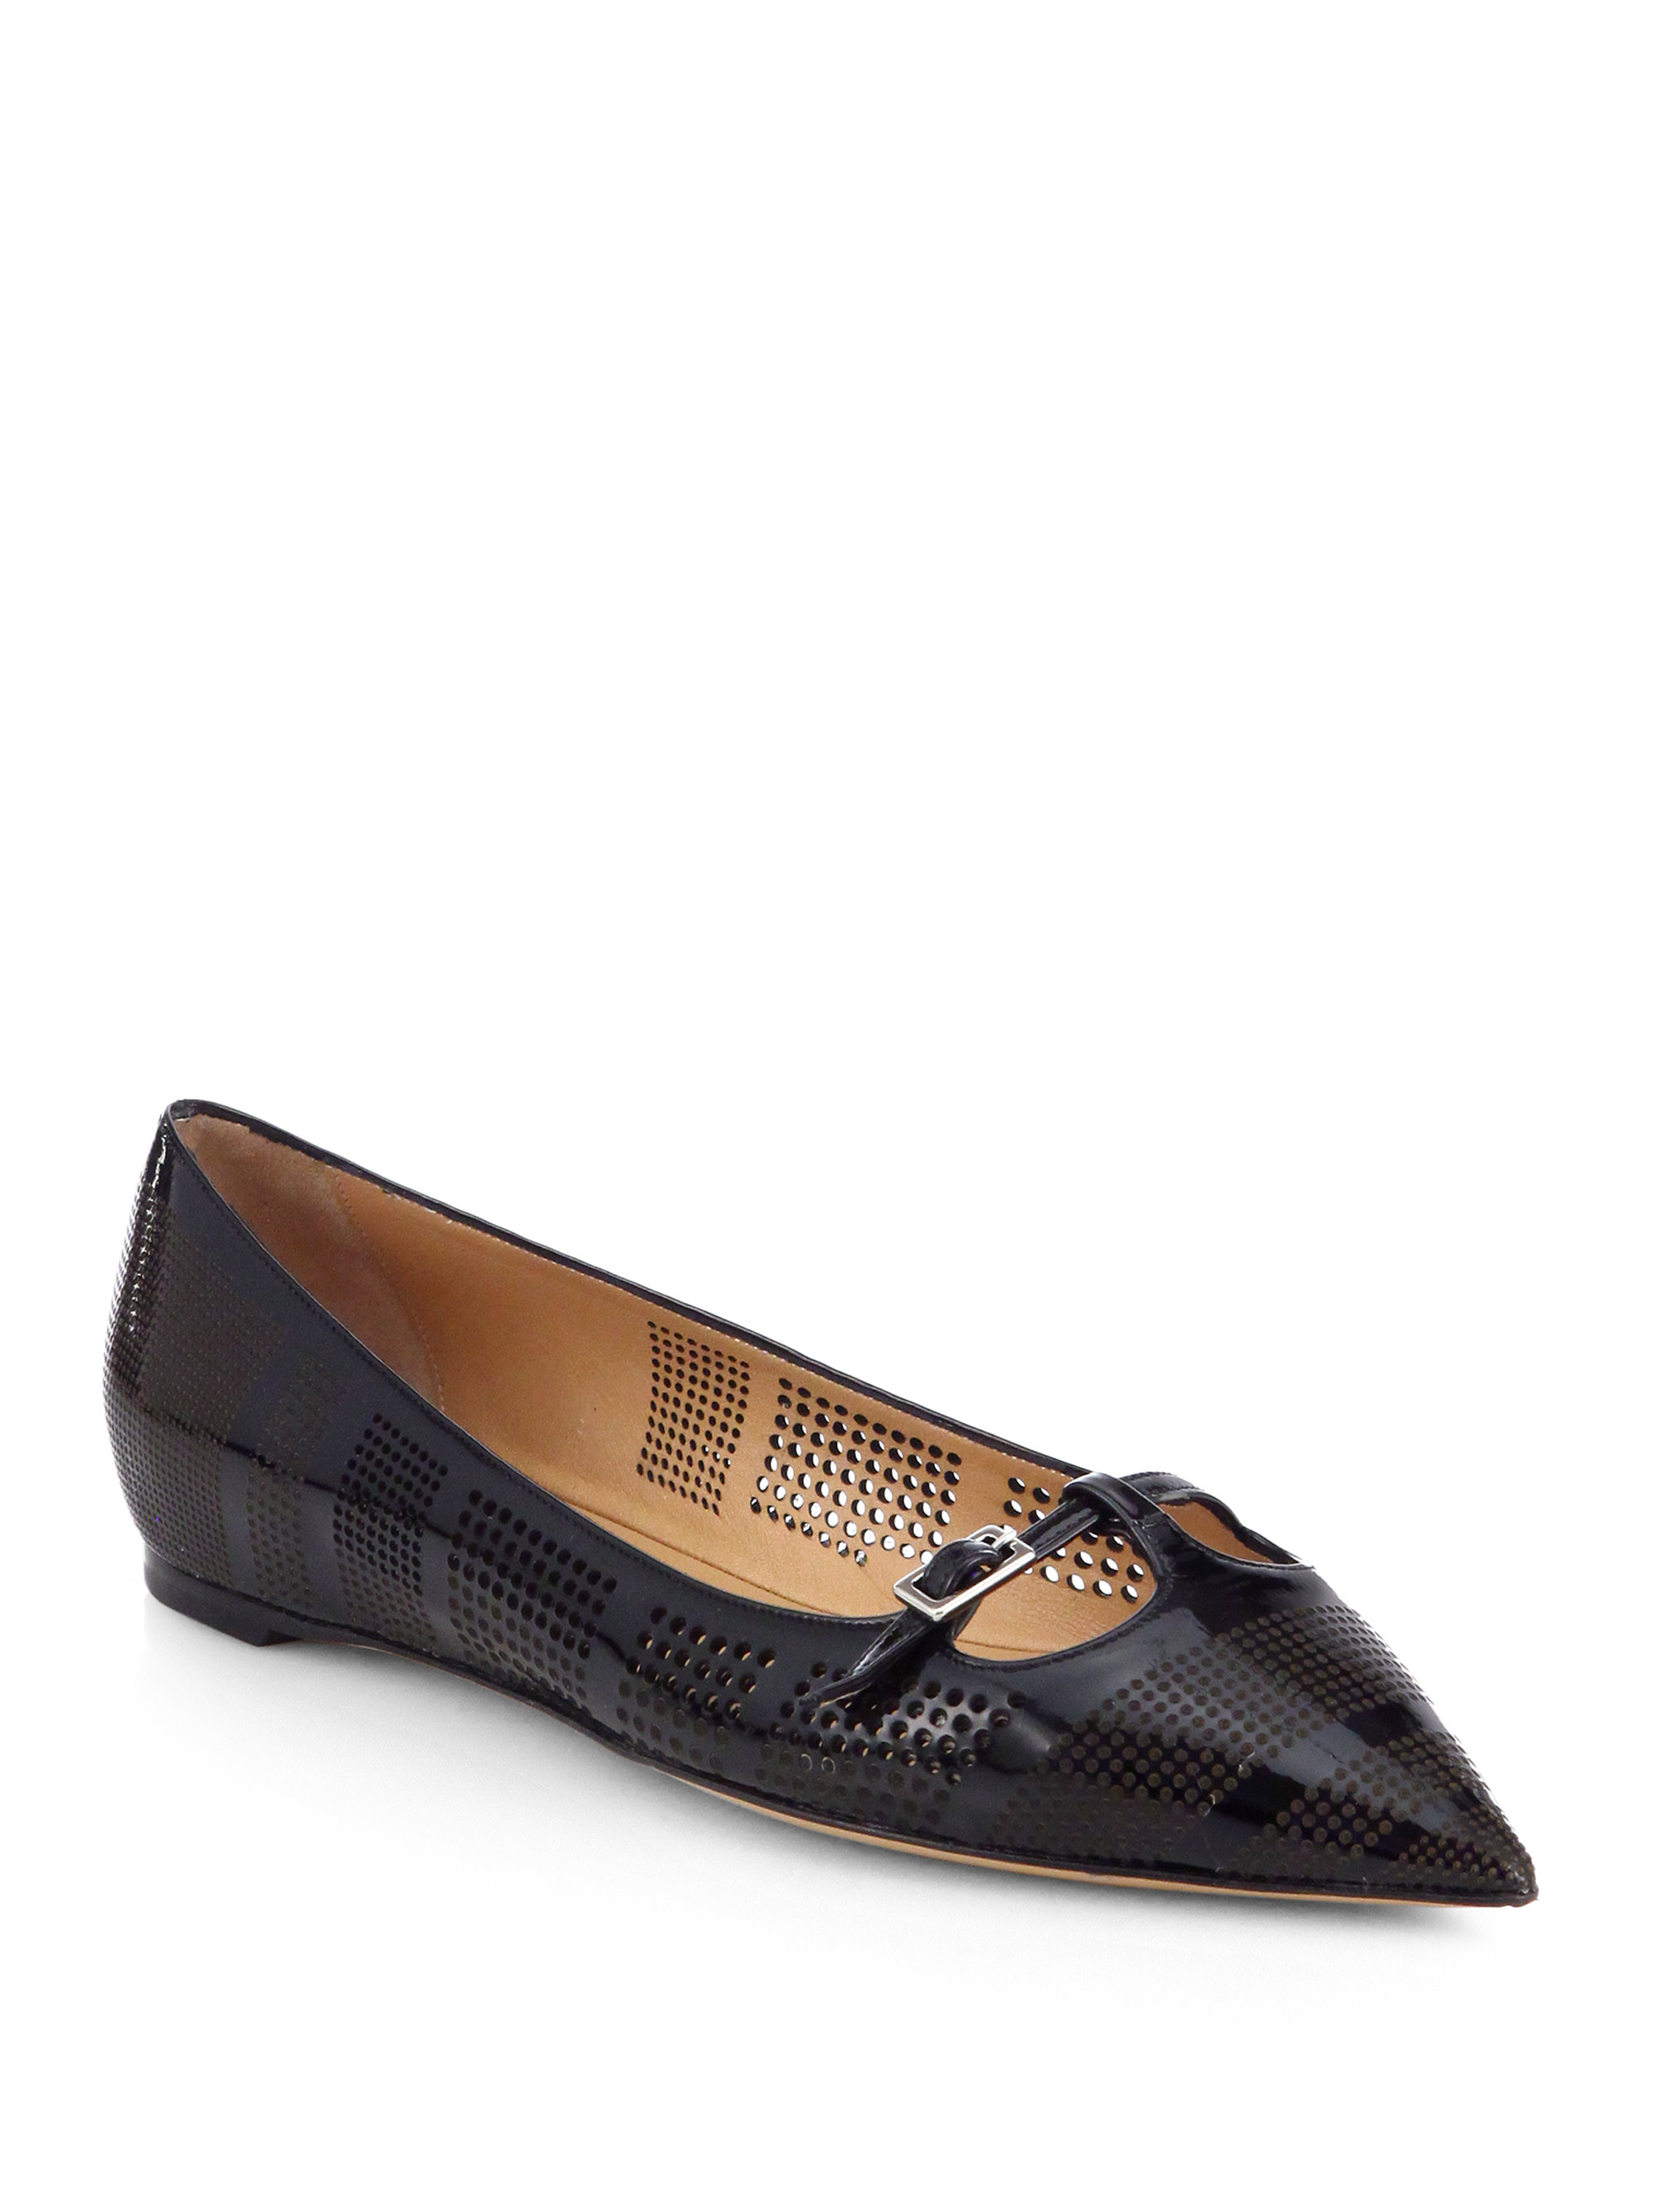 Ferragamo Patty Perforated Patent Leather Ballet Flats in Black | Lyst